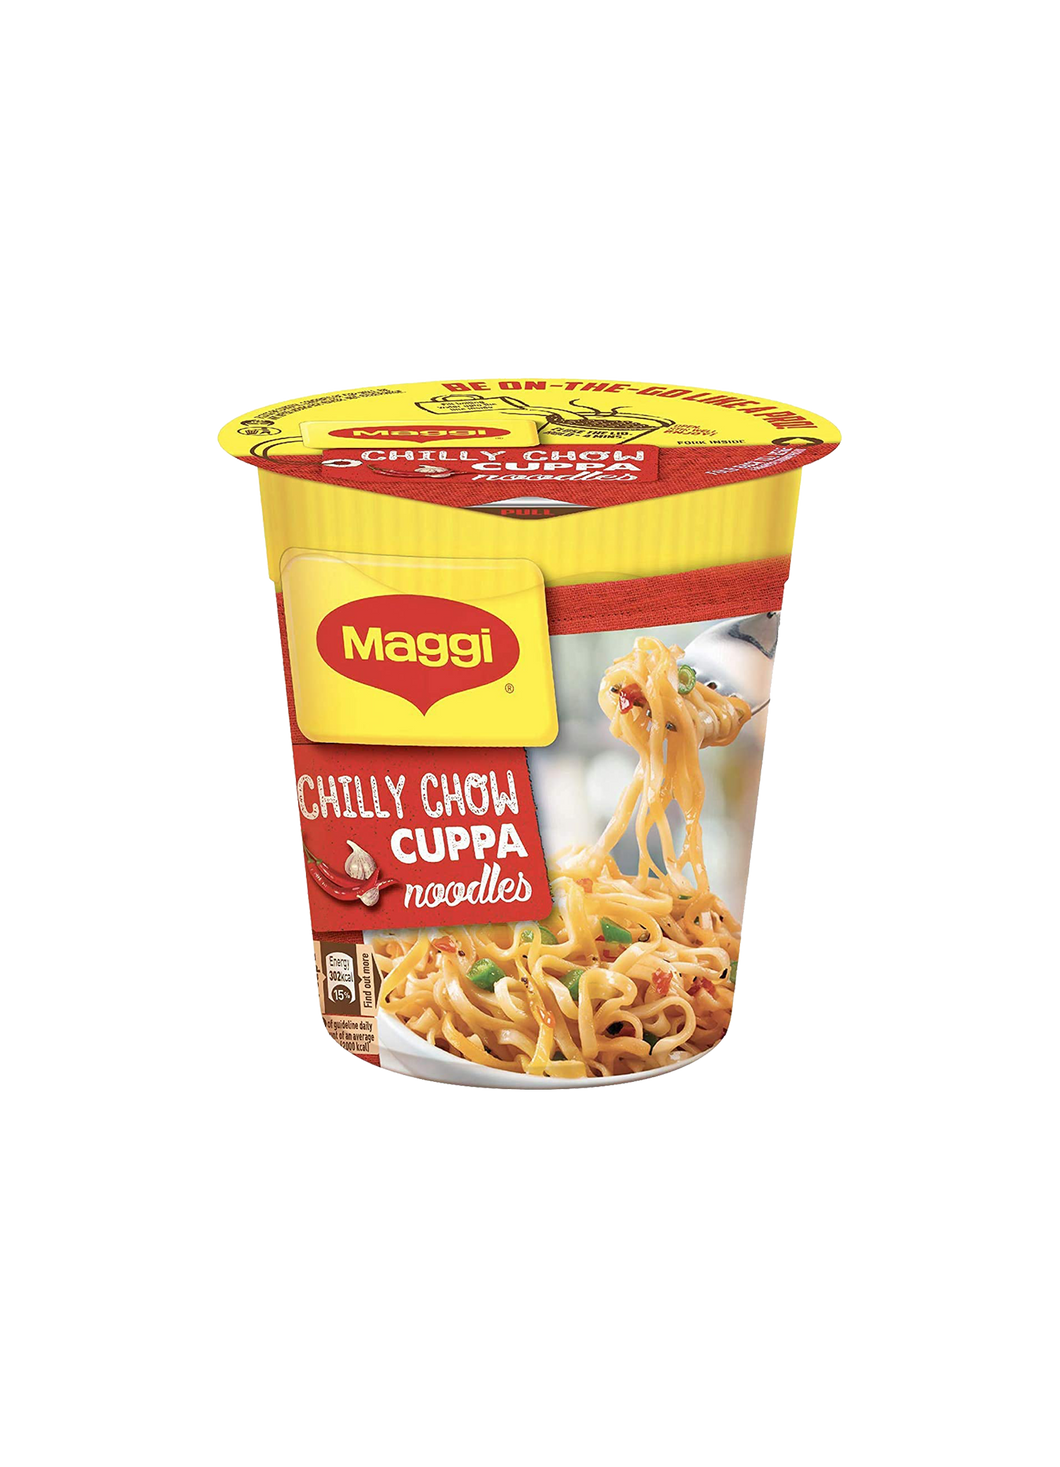 Maggi Chilly Chow Cuppa Cup Noodles 70g